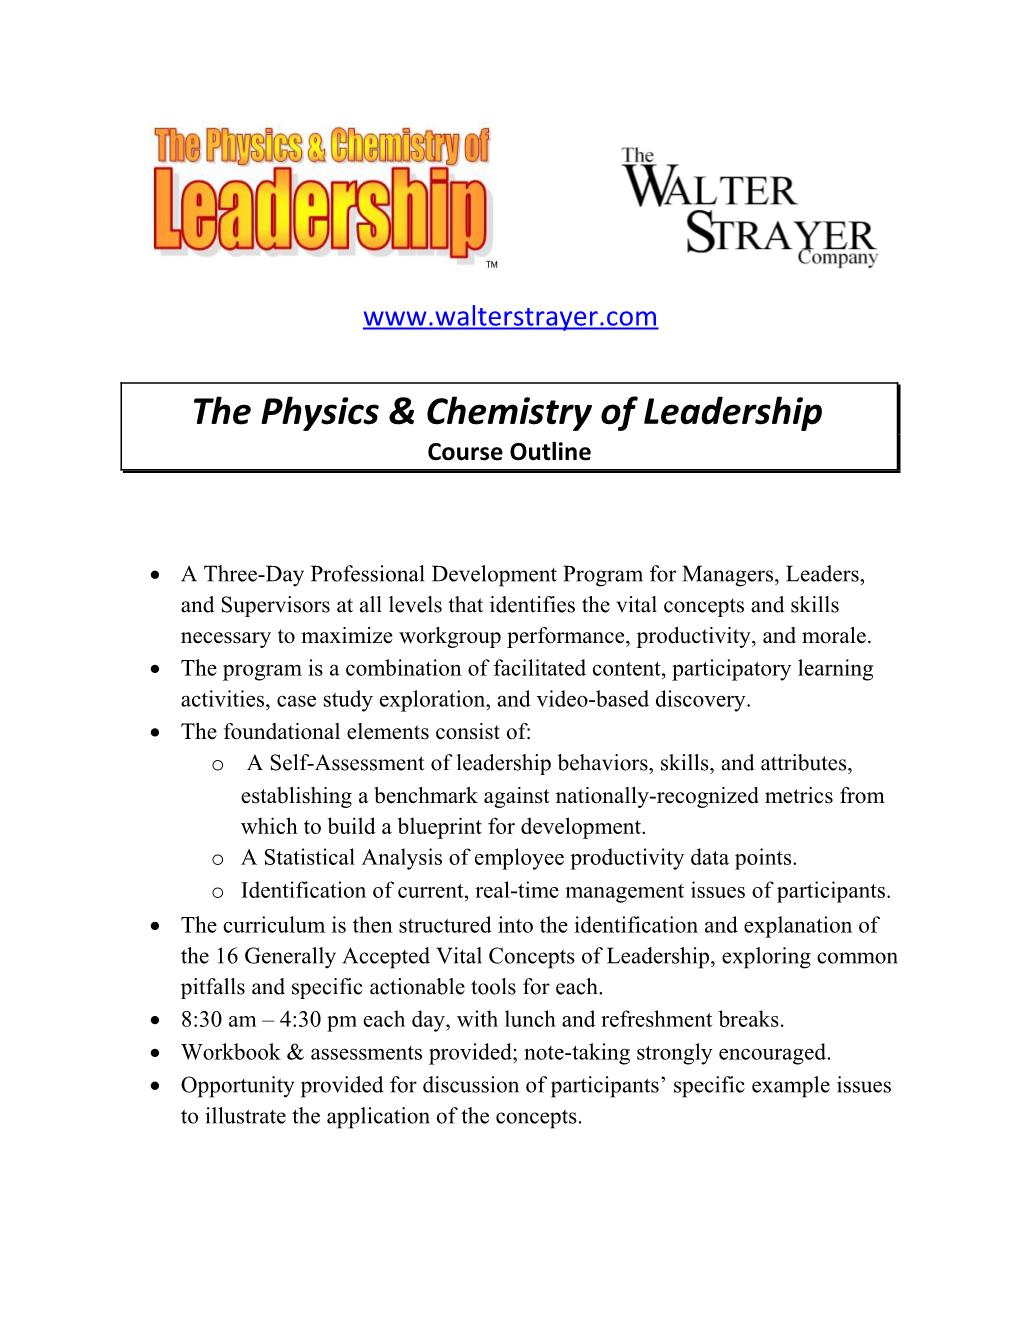 The Physics & Chemistry of Leadership